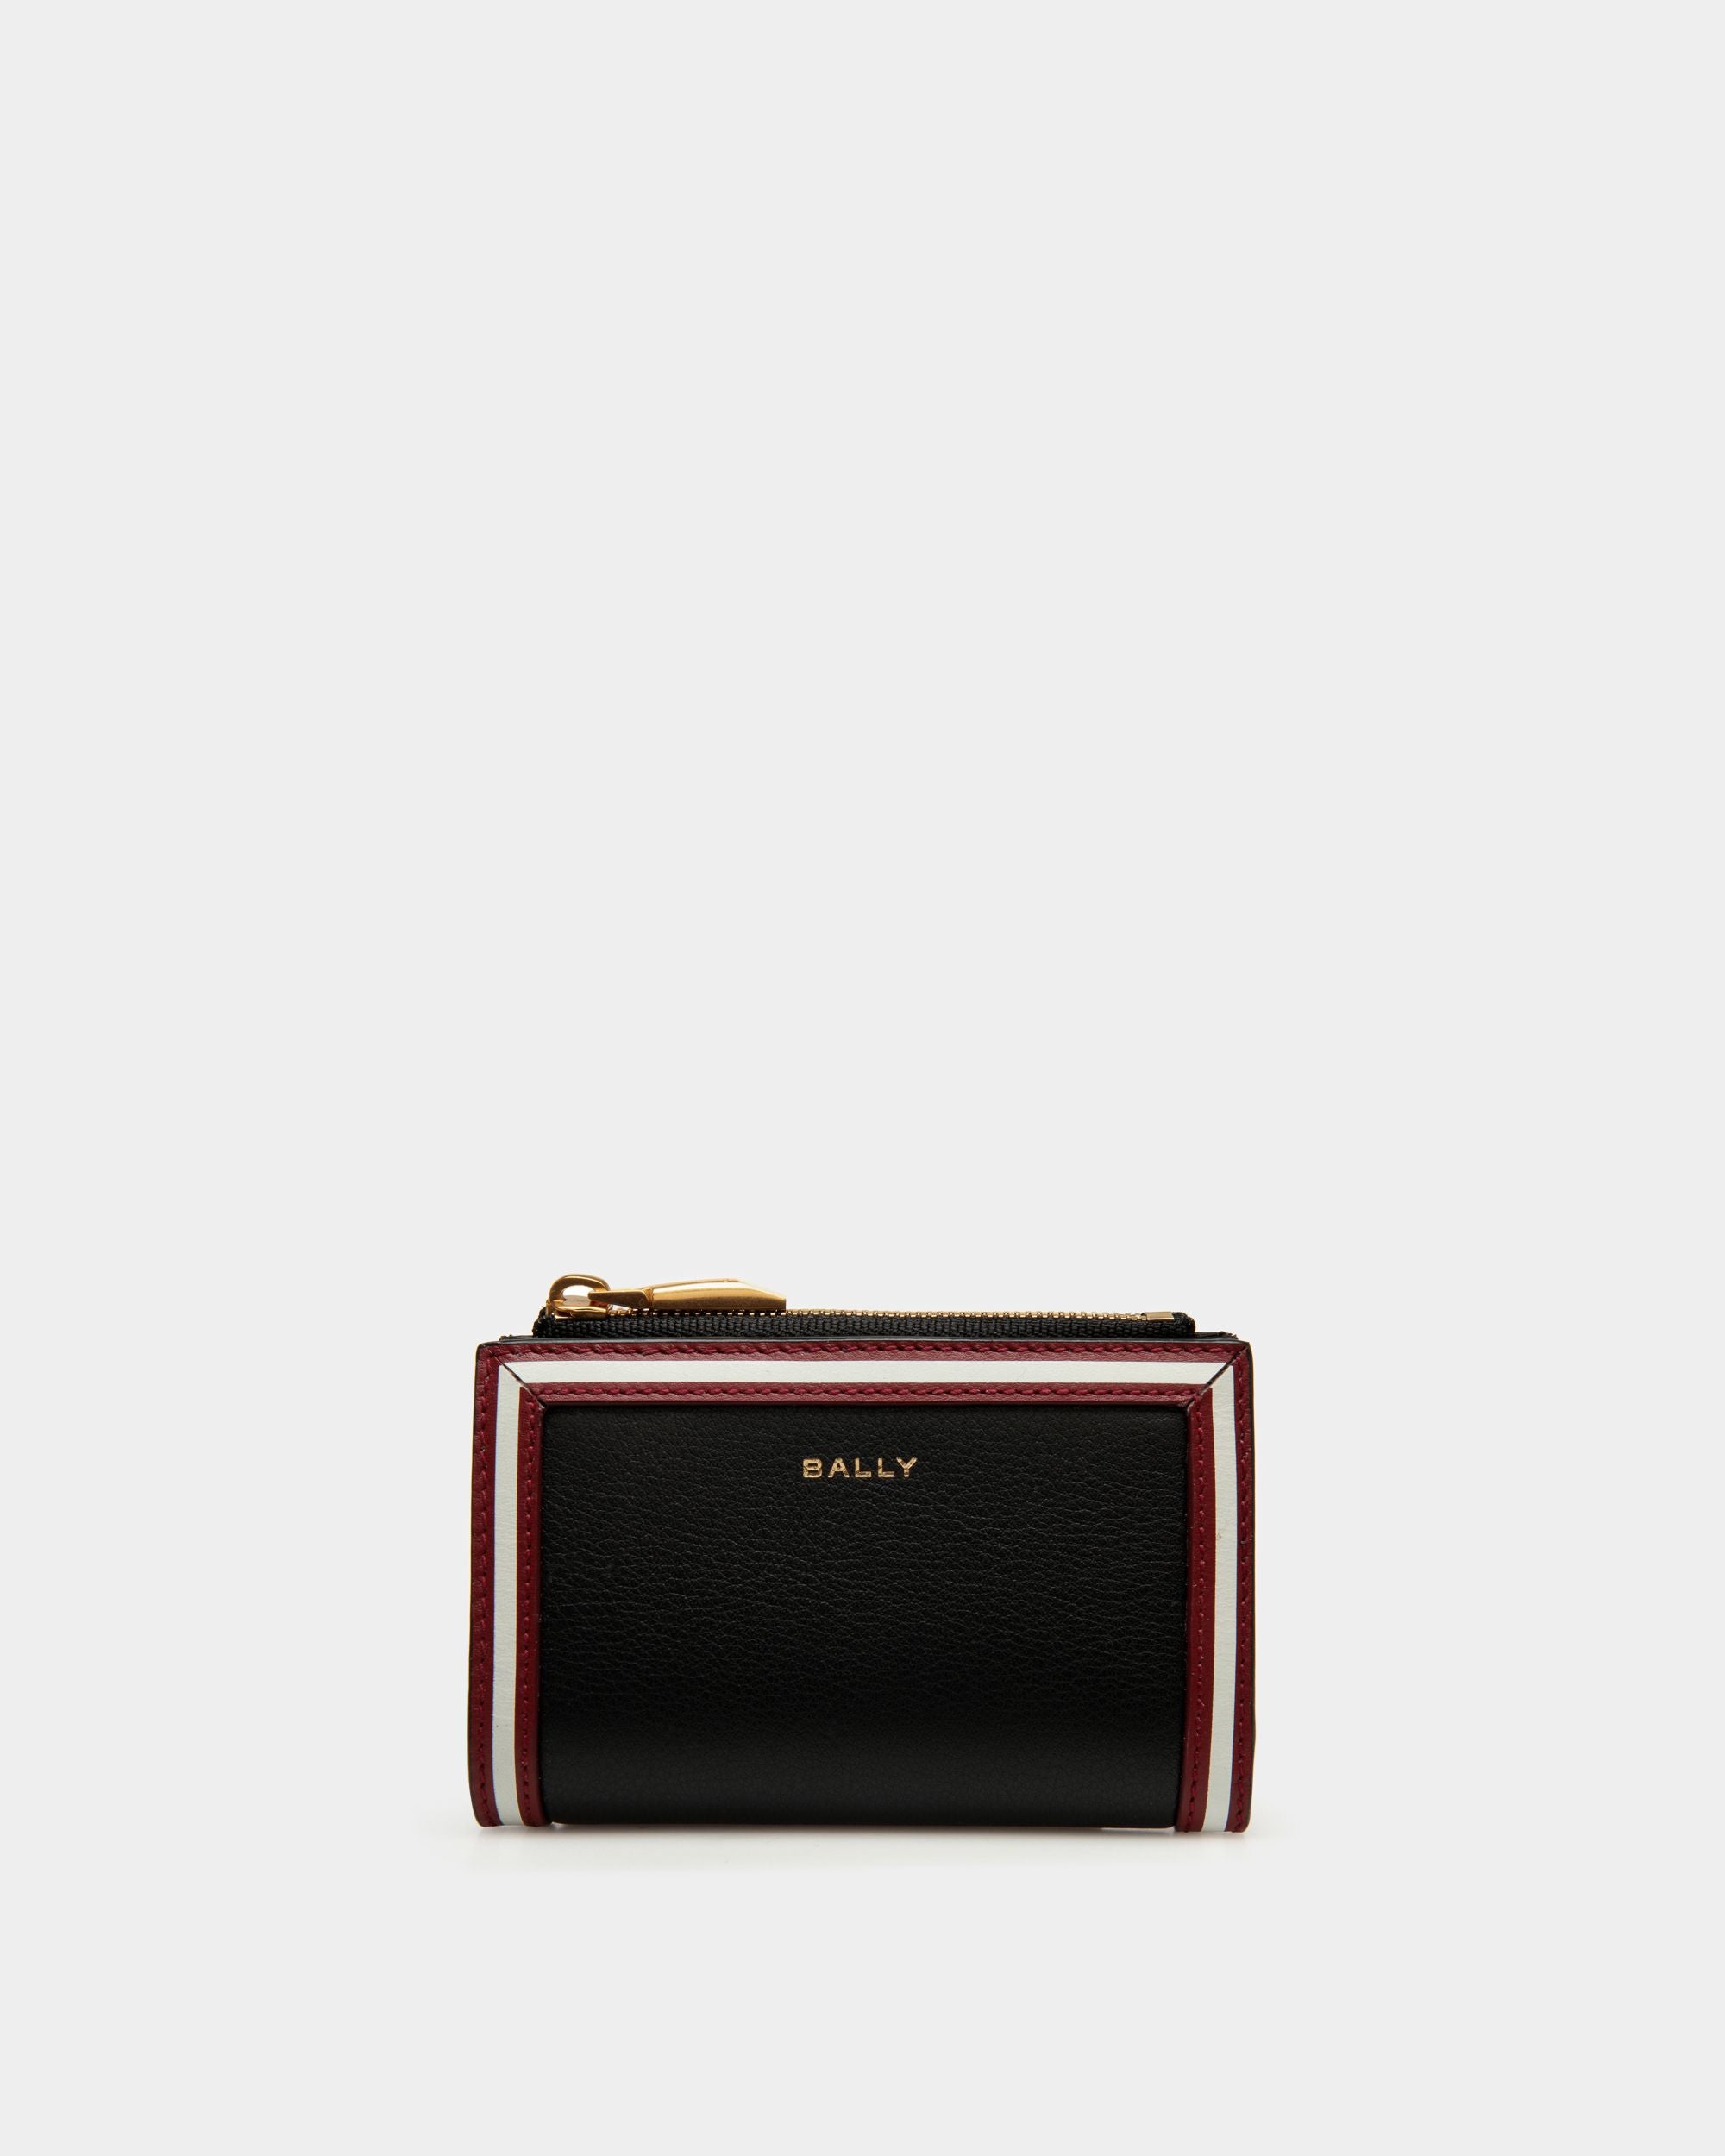 Code | Women's Wallet in Black Leather | Bally | Still Life Front